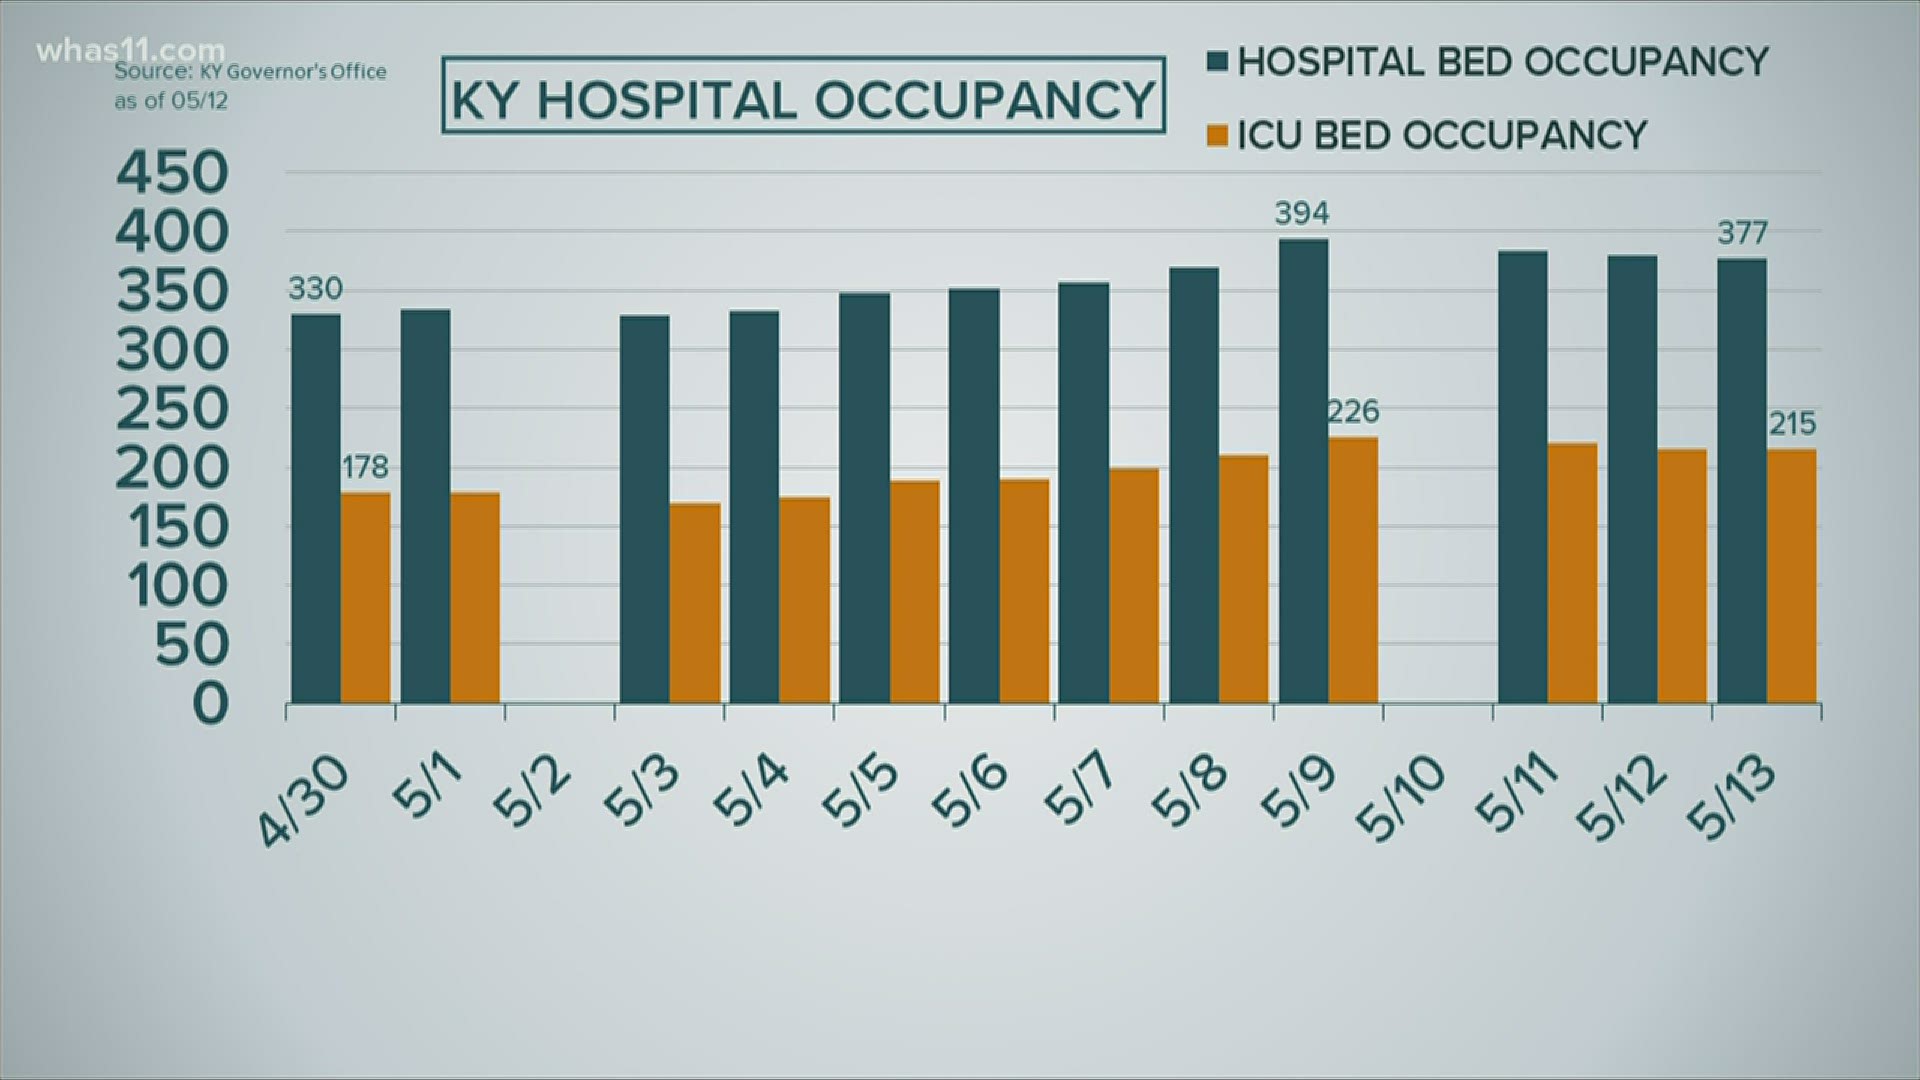 The hospitalization data gives us a clear idea of who is seriously sick and if that number is going up or down.